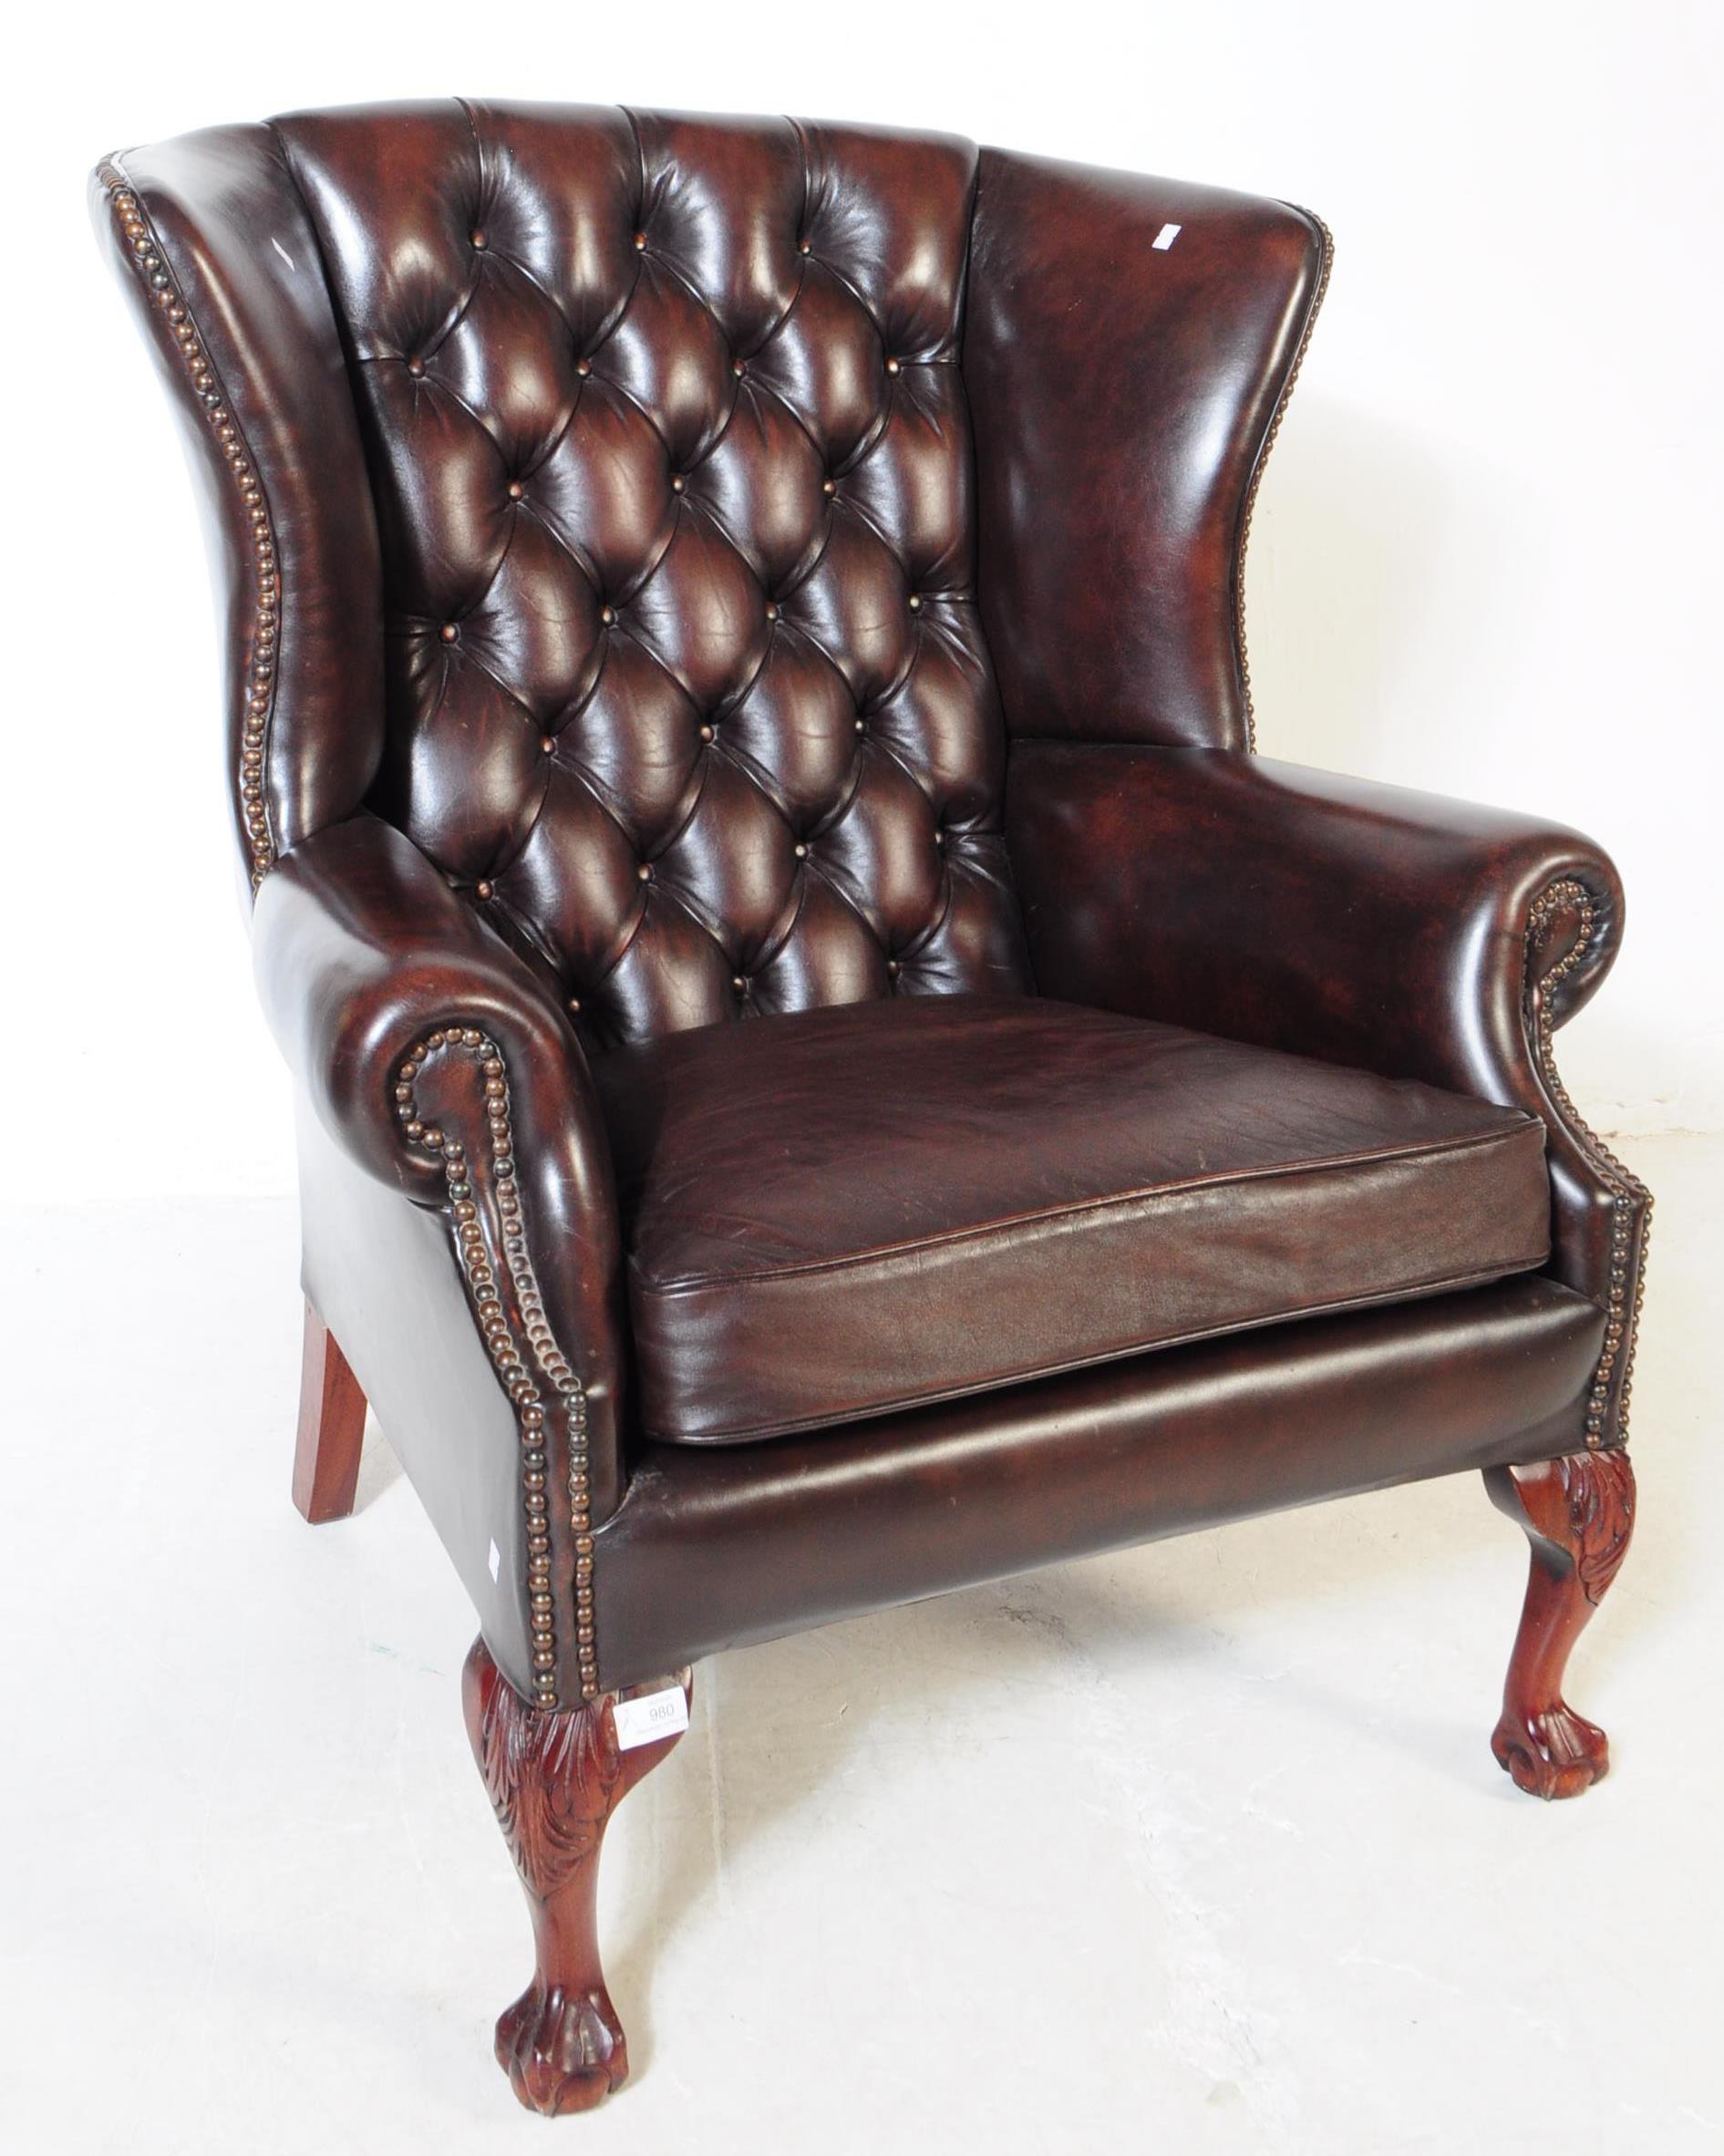 CHESTERFIELD STYLE BROWN LEATHER WINGBACK ARMCHAIR